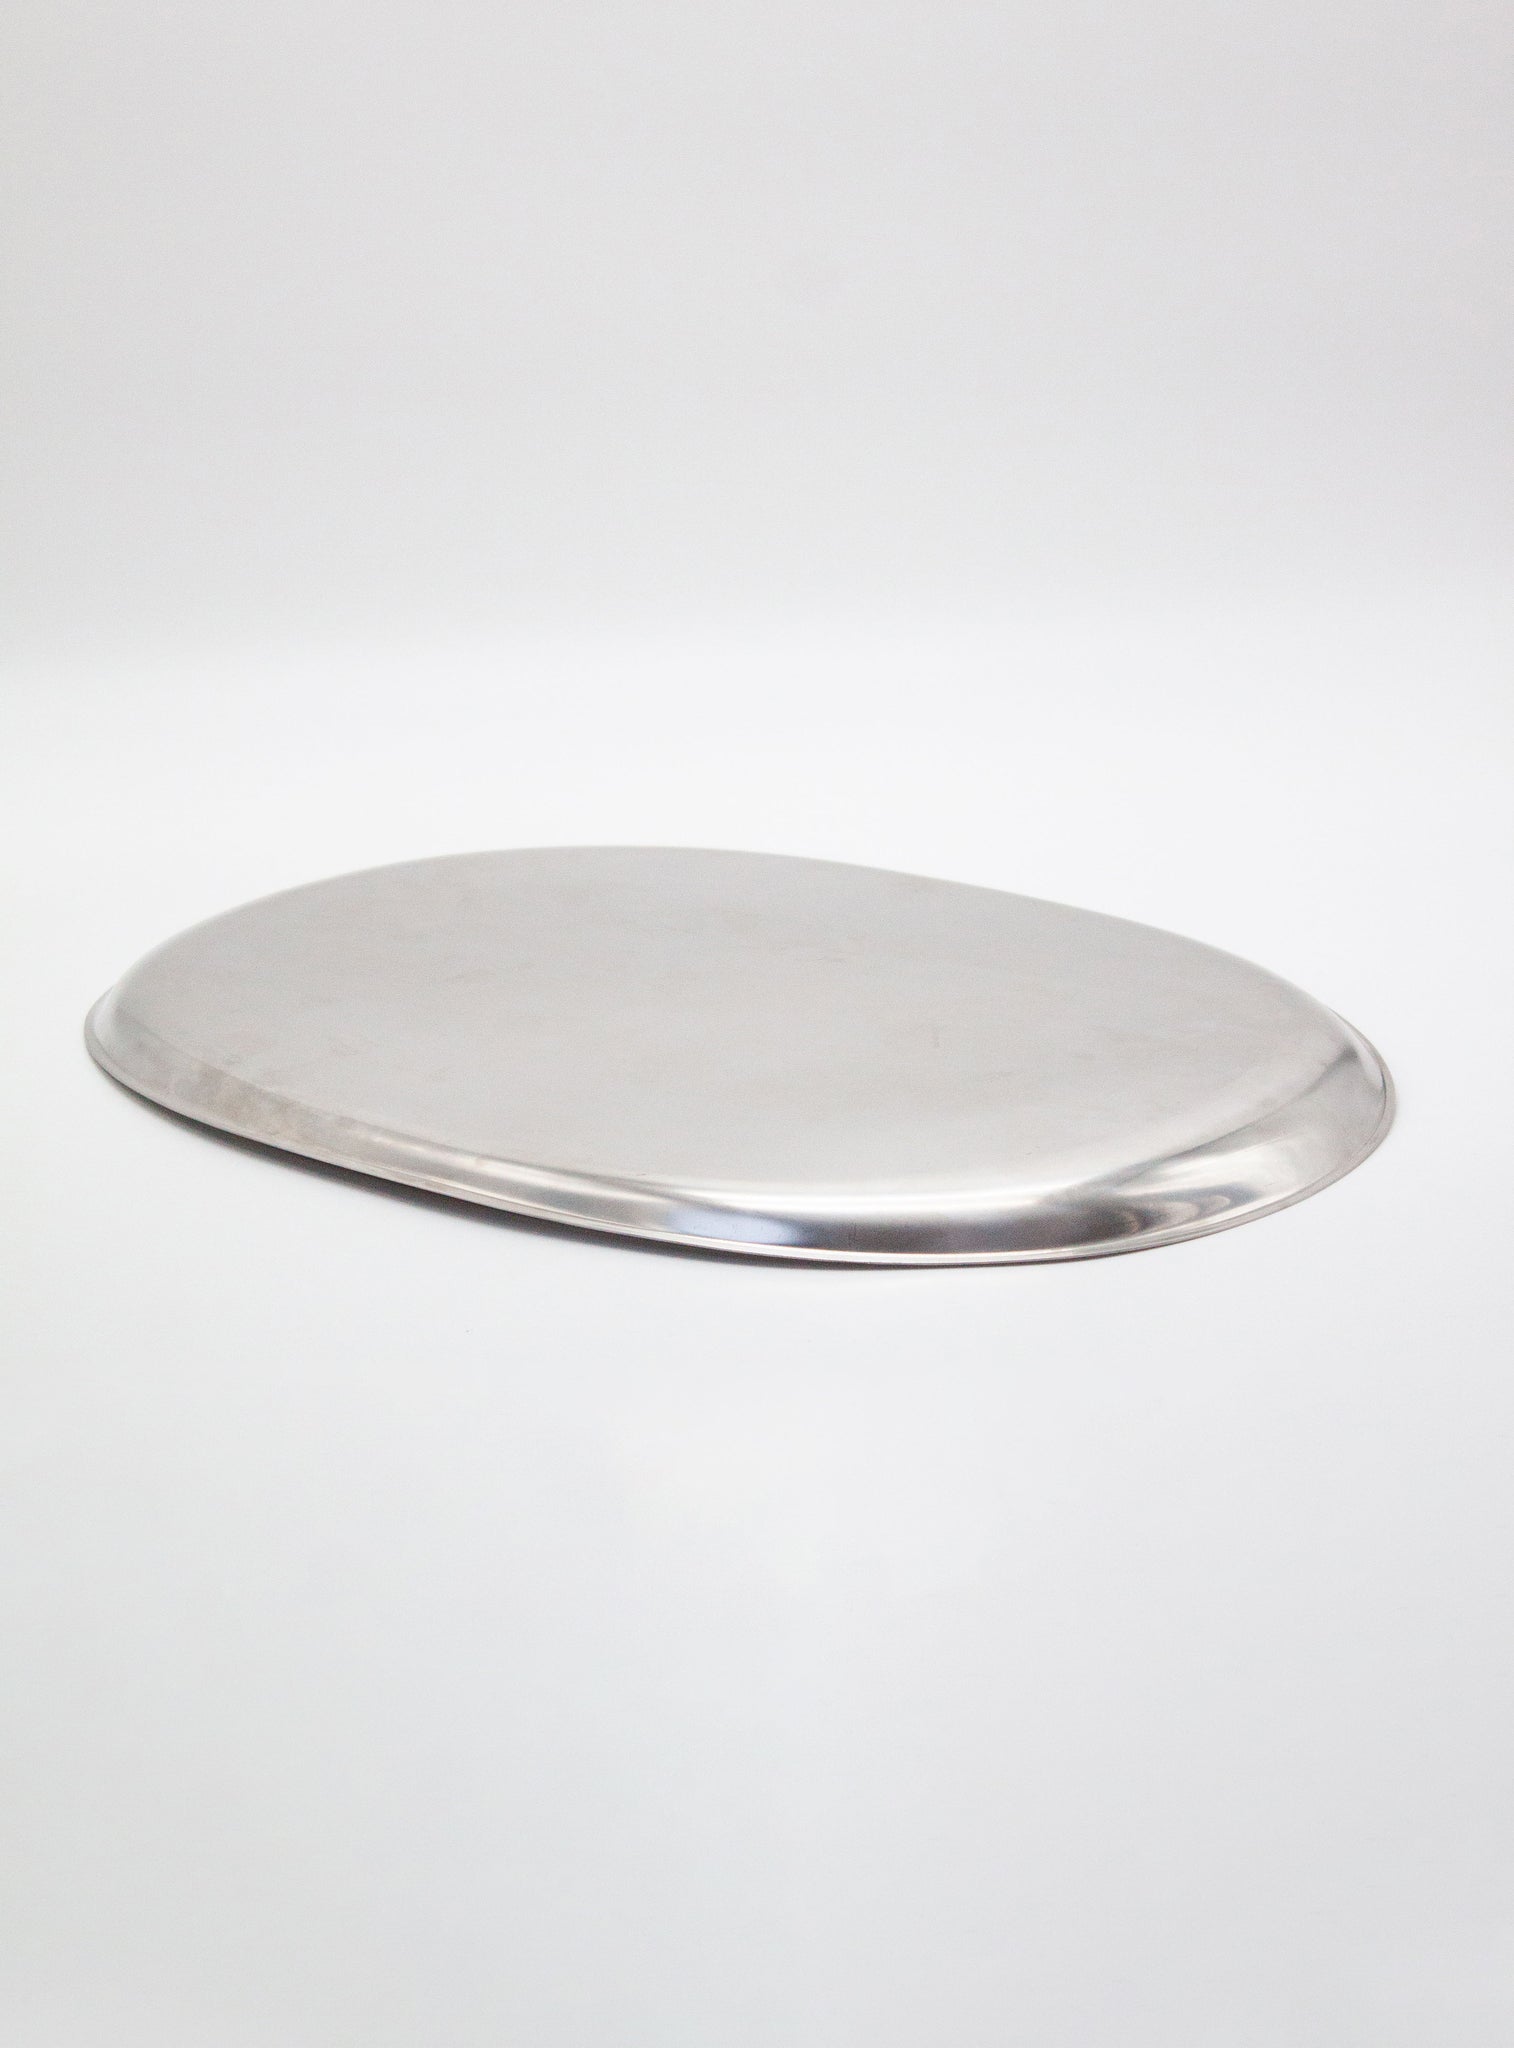 AMC Italy Stainless Steel Serving Tray